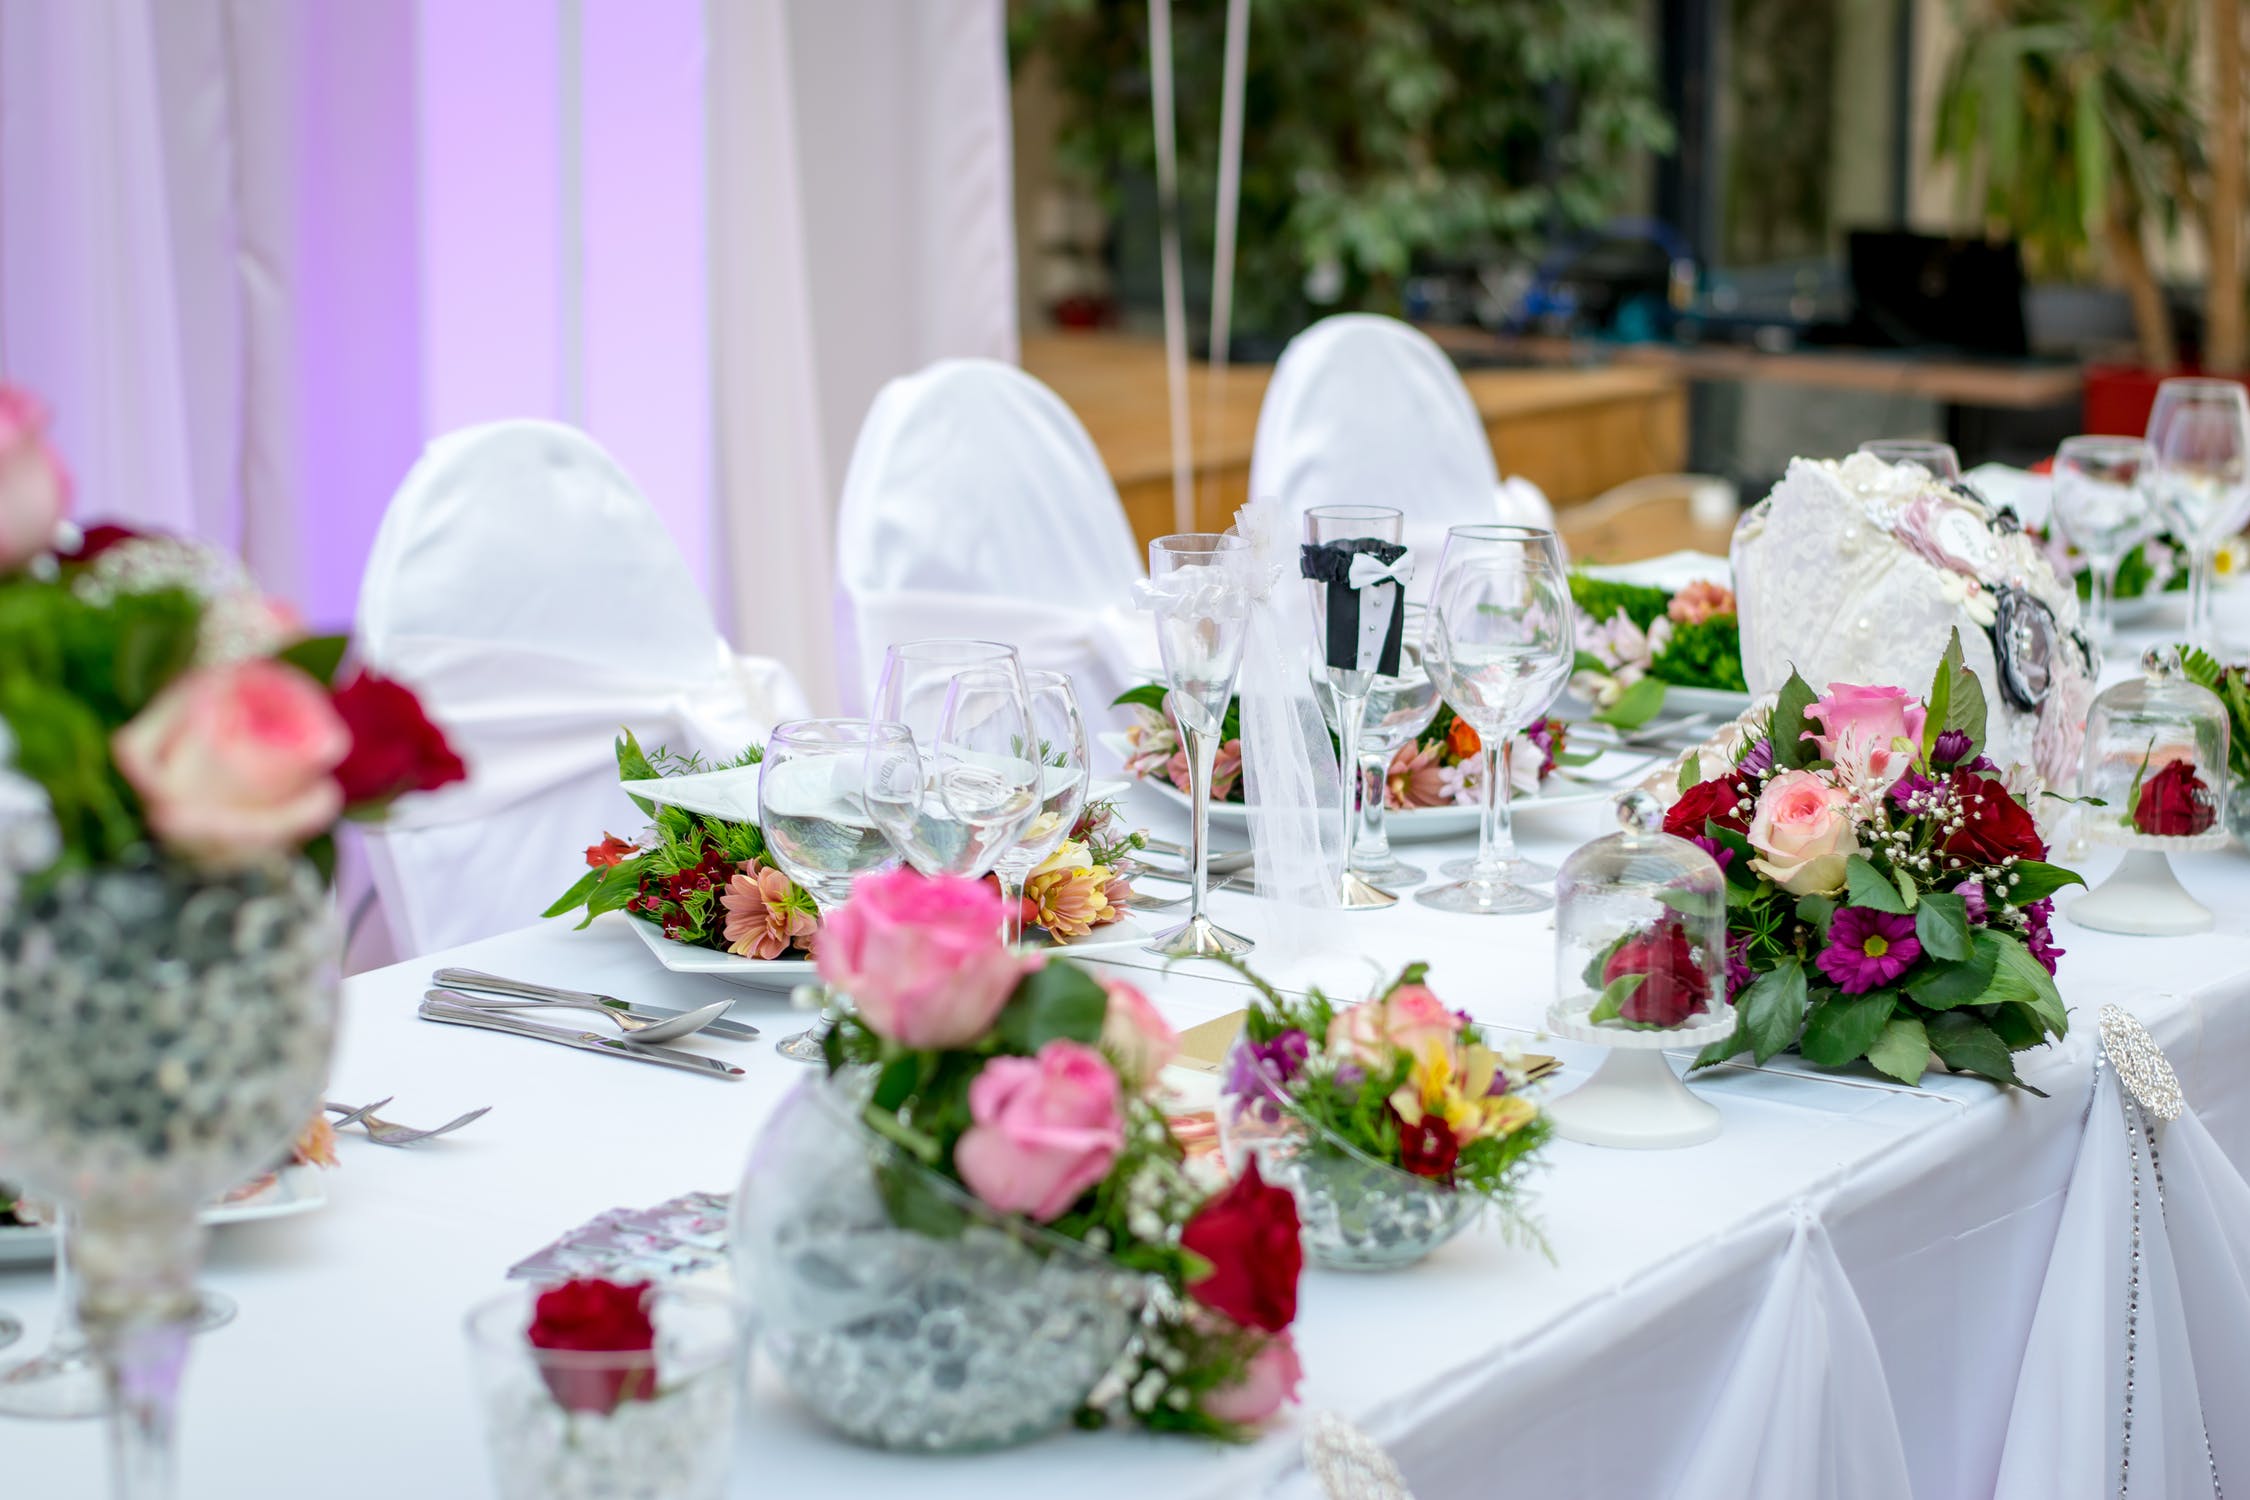 Wedding decor hire: How to Choose Best Decor for Your Wedding